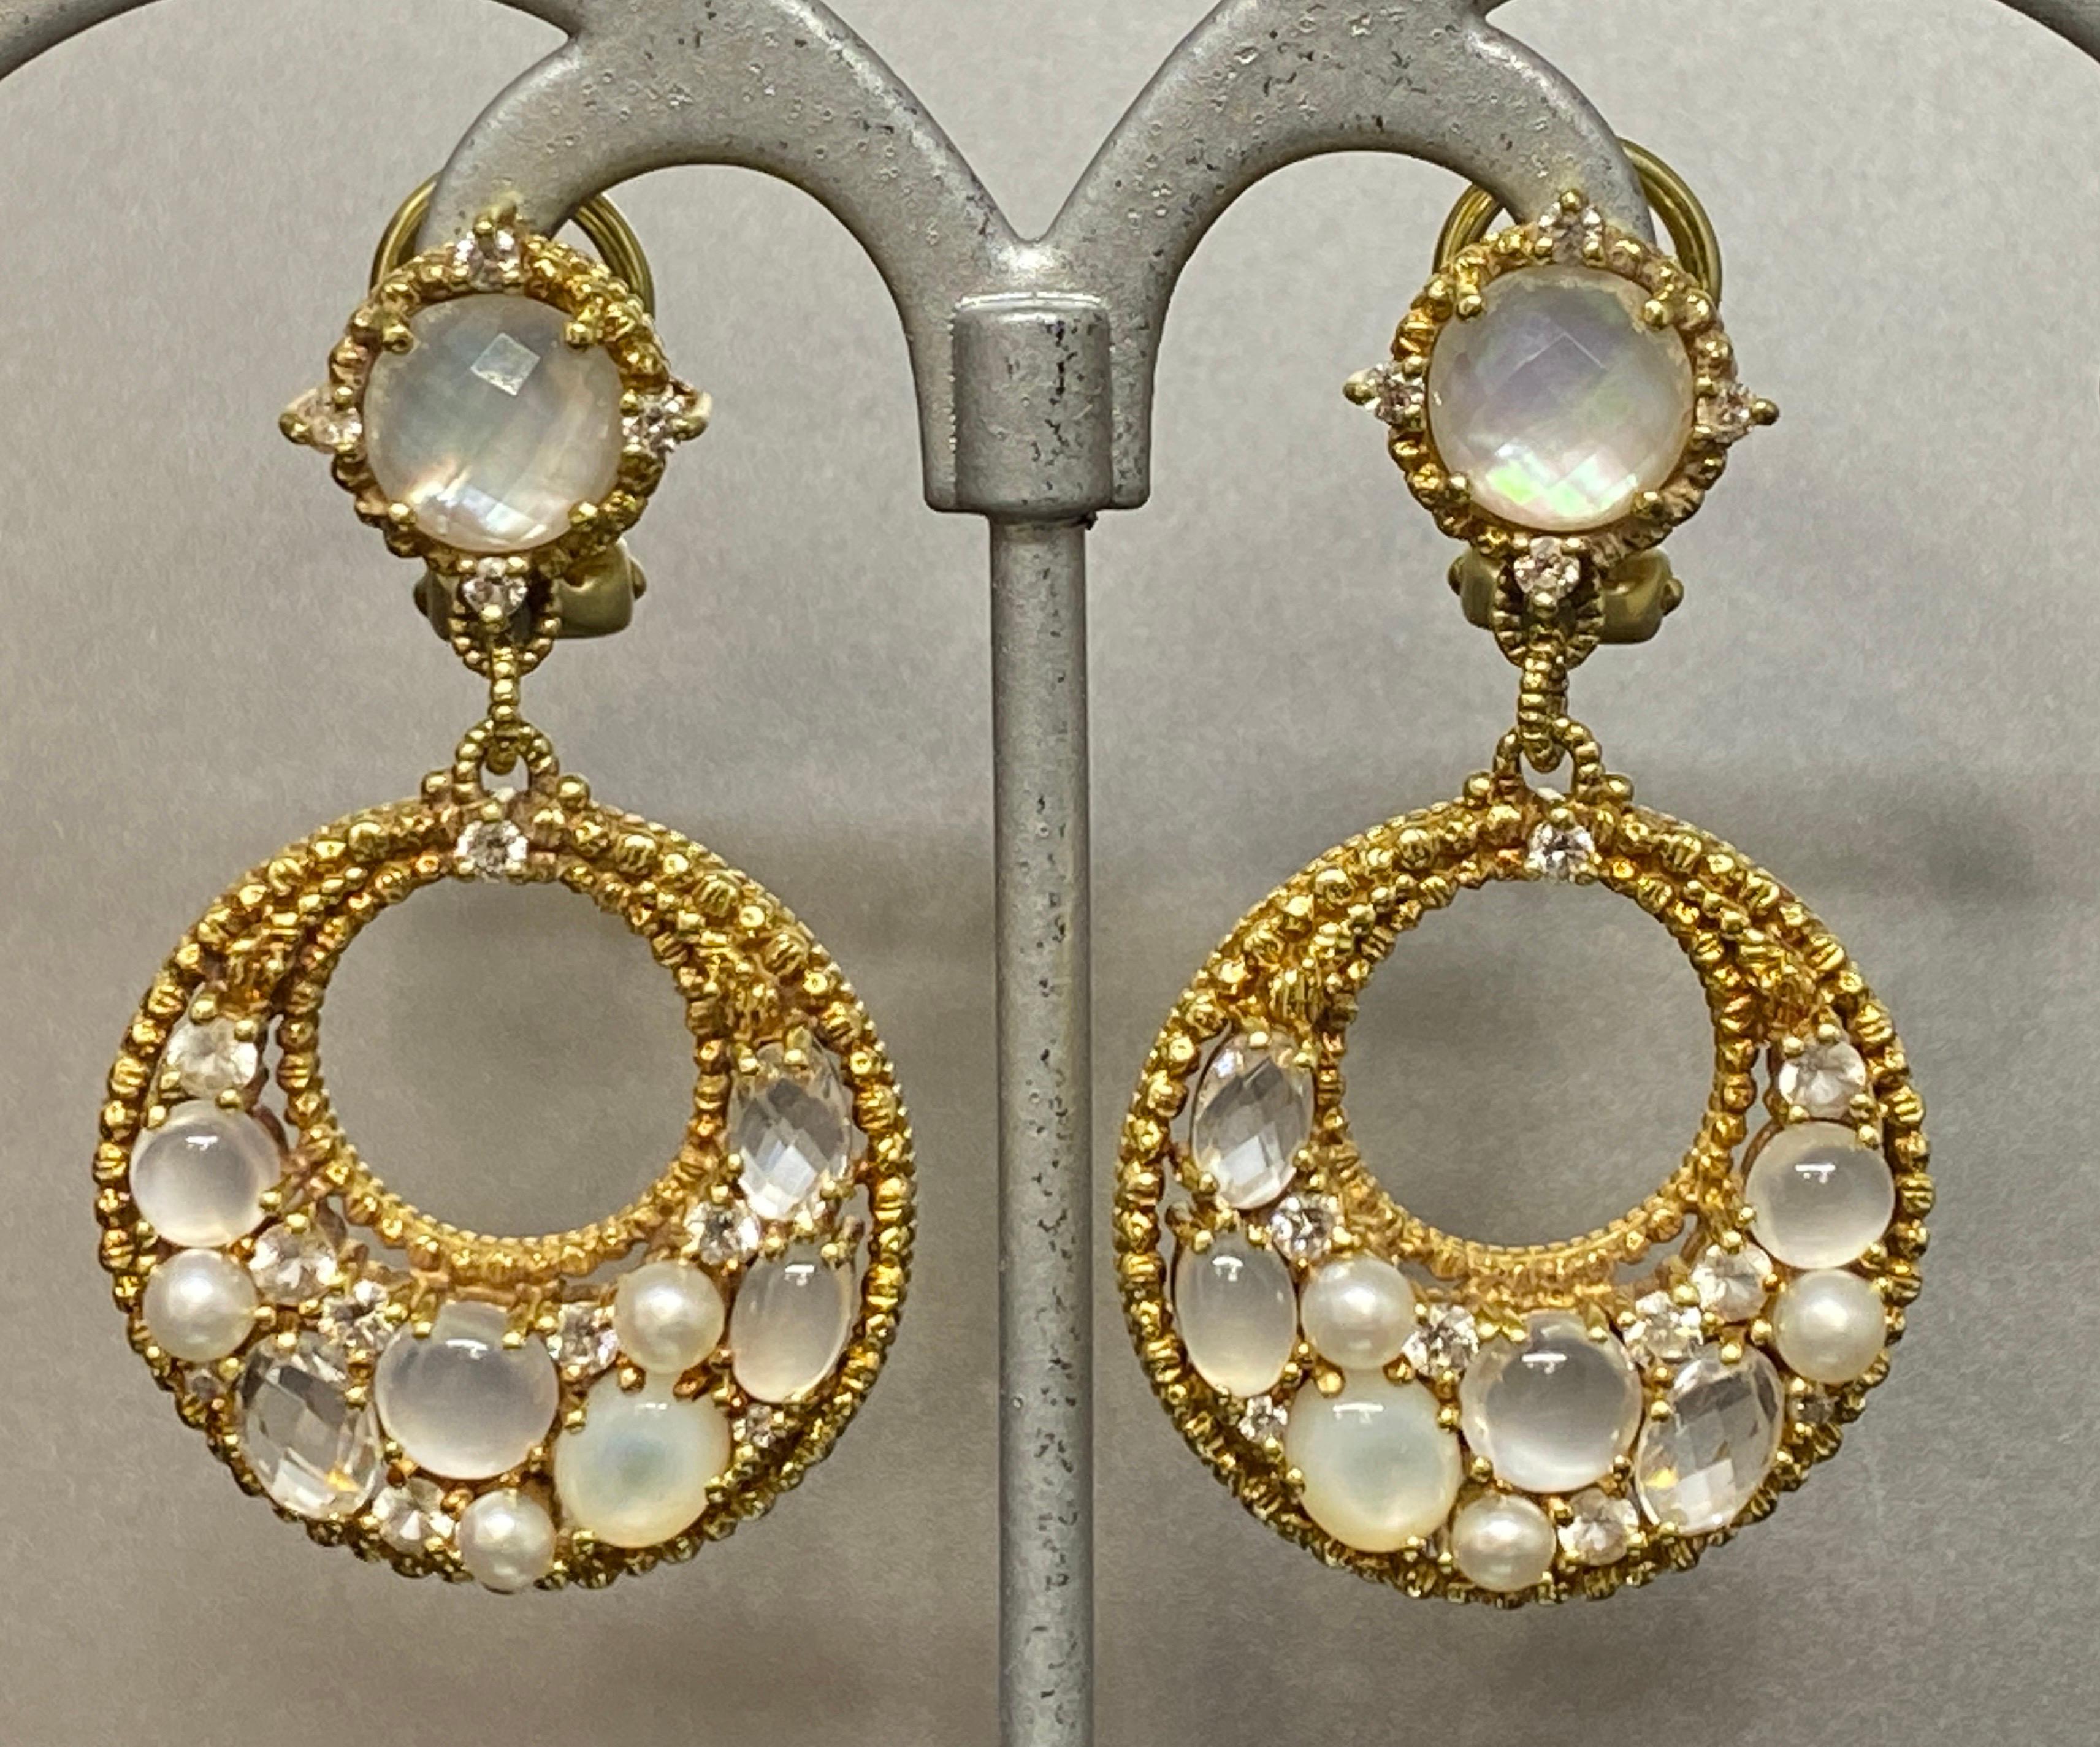 Upn for. your consideration is this pair of sparkling 18k yellow gold & gemstone earrings from innovative designer, Judith Ripka.   Known for her design and mixing of eclectic gems along with diamonds and gold, Ripka has done a superb job with these